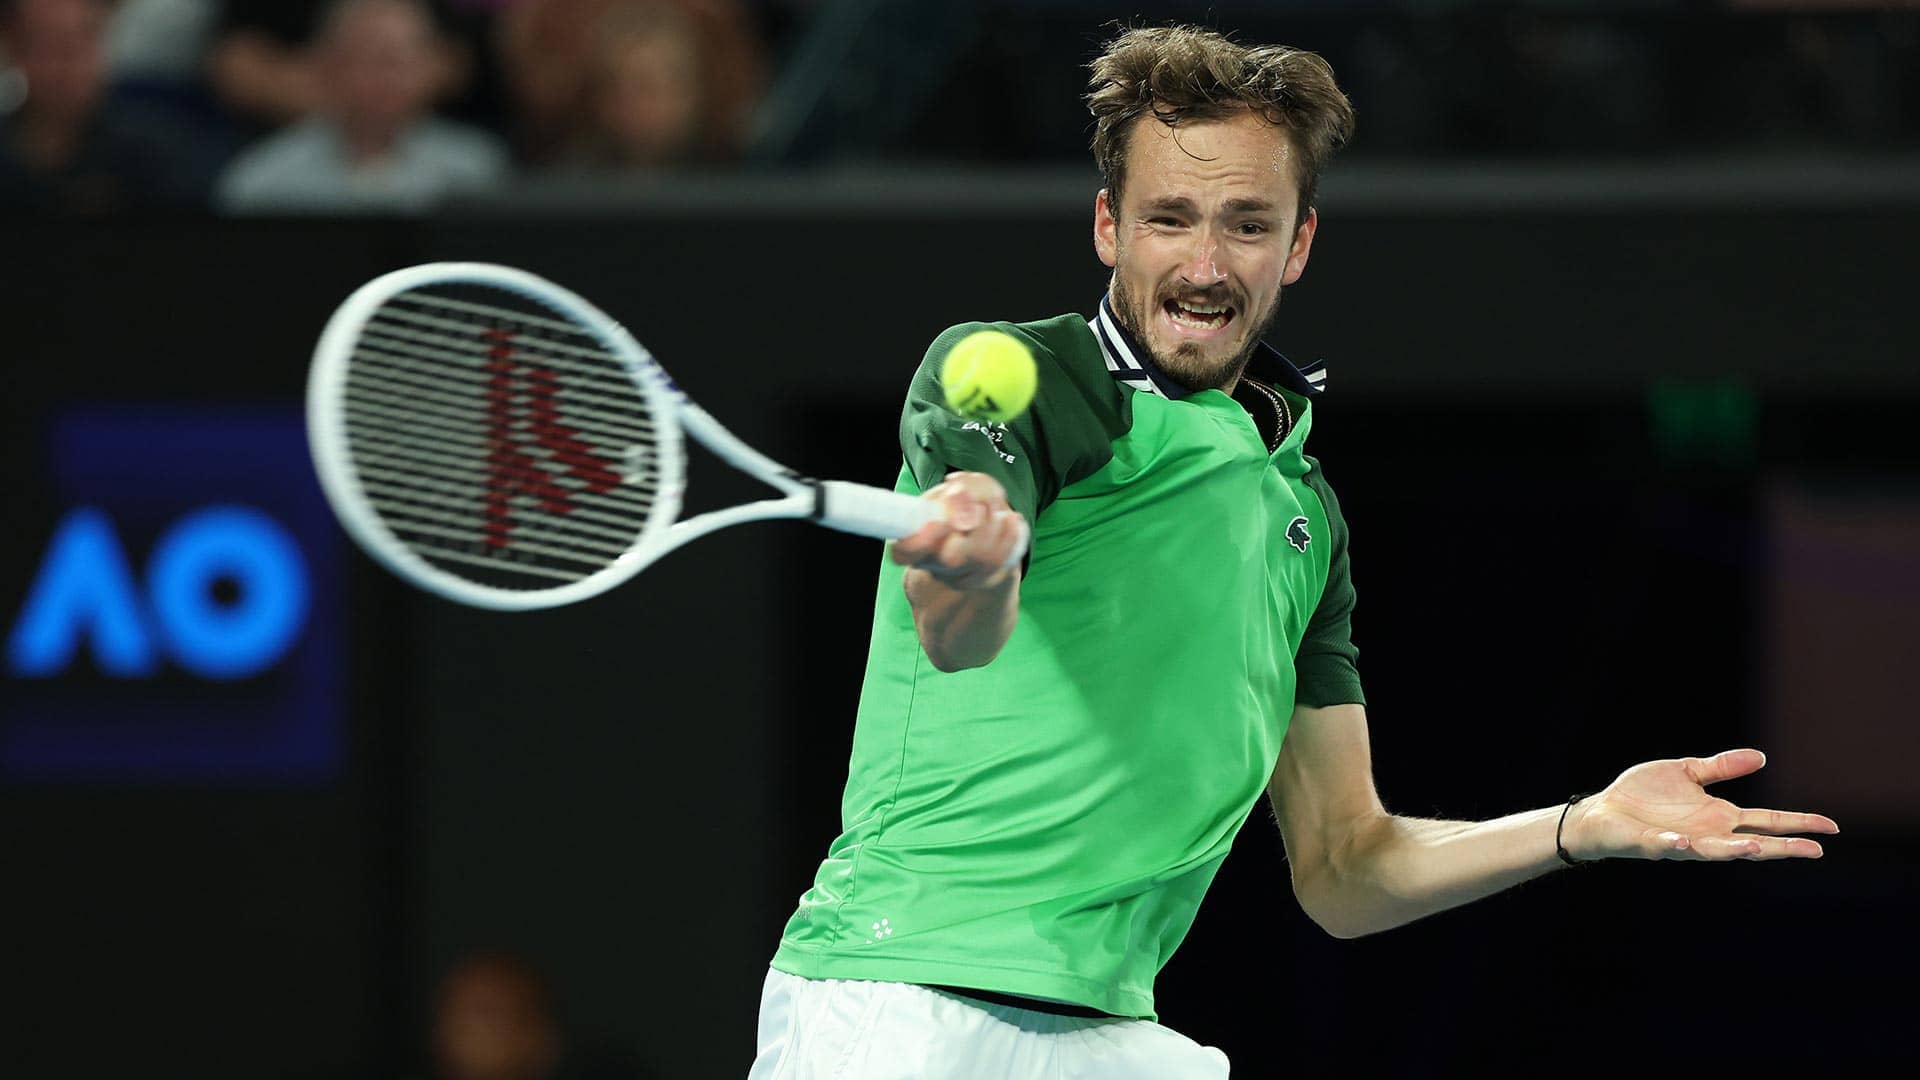 Daniil Medvedev is chasing his second major title and first in Melbourne.